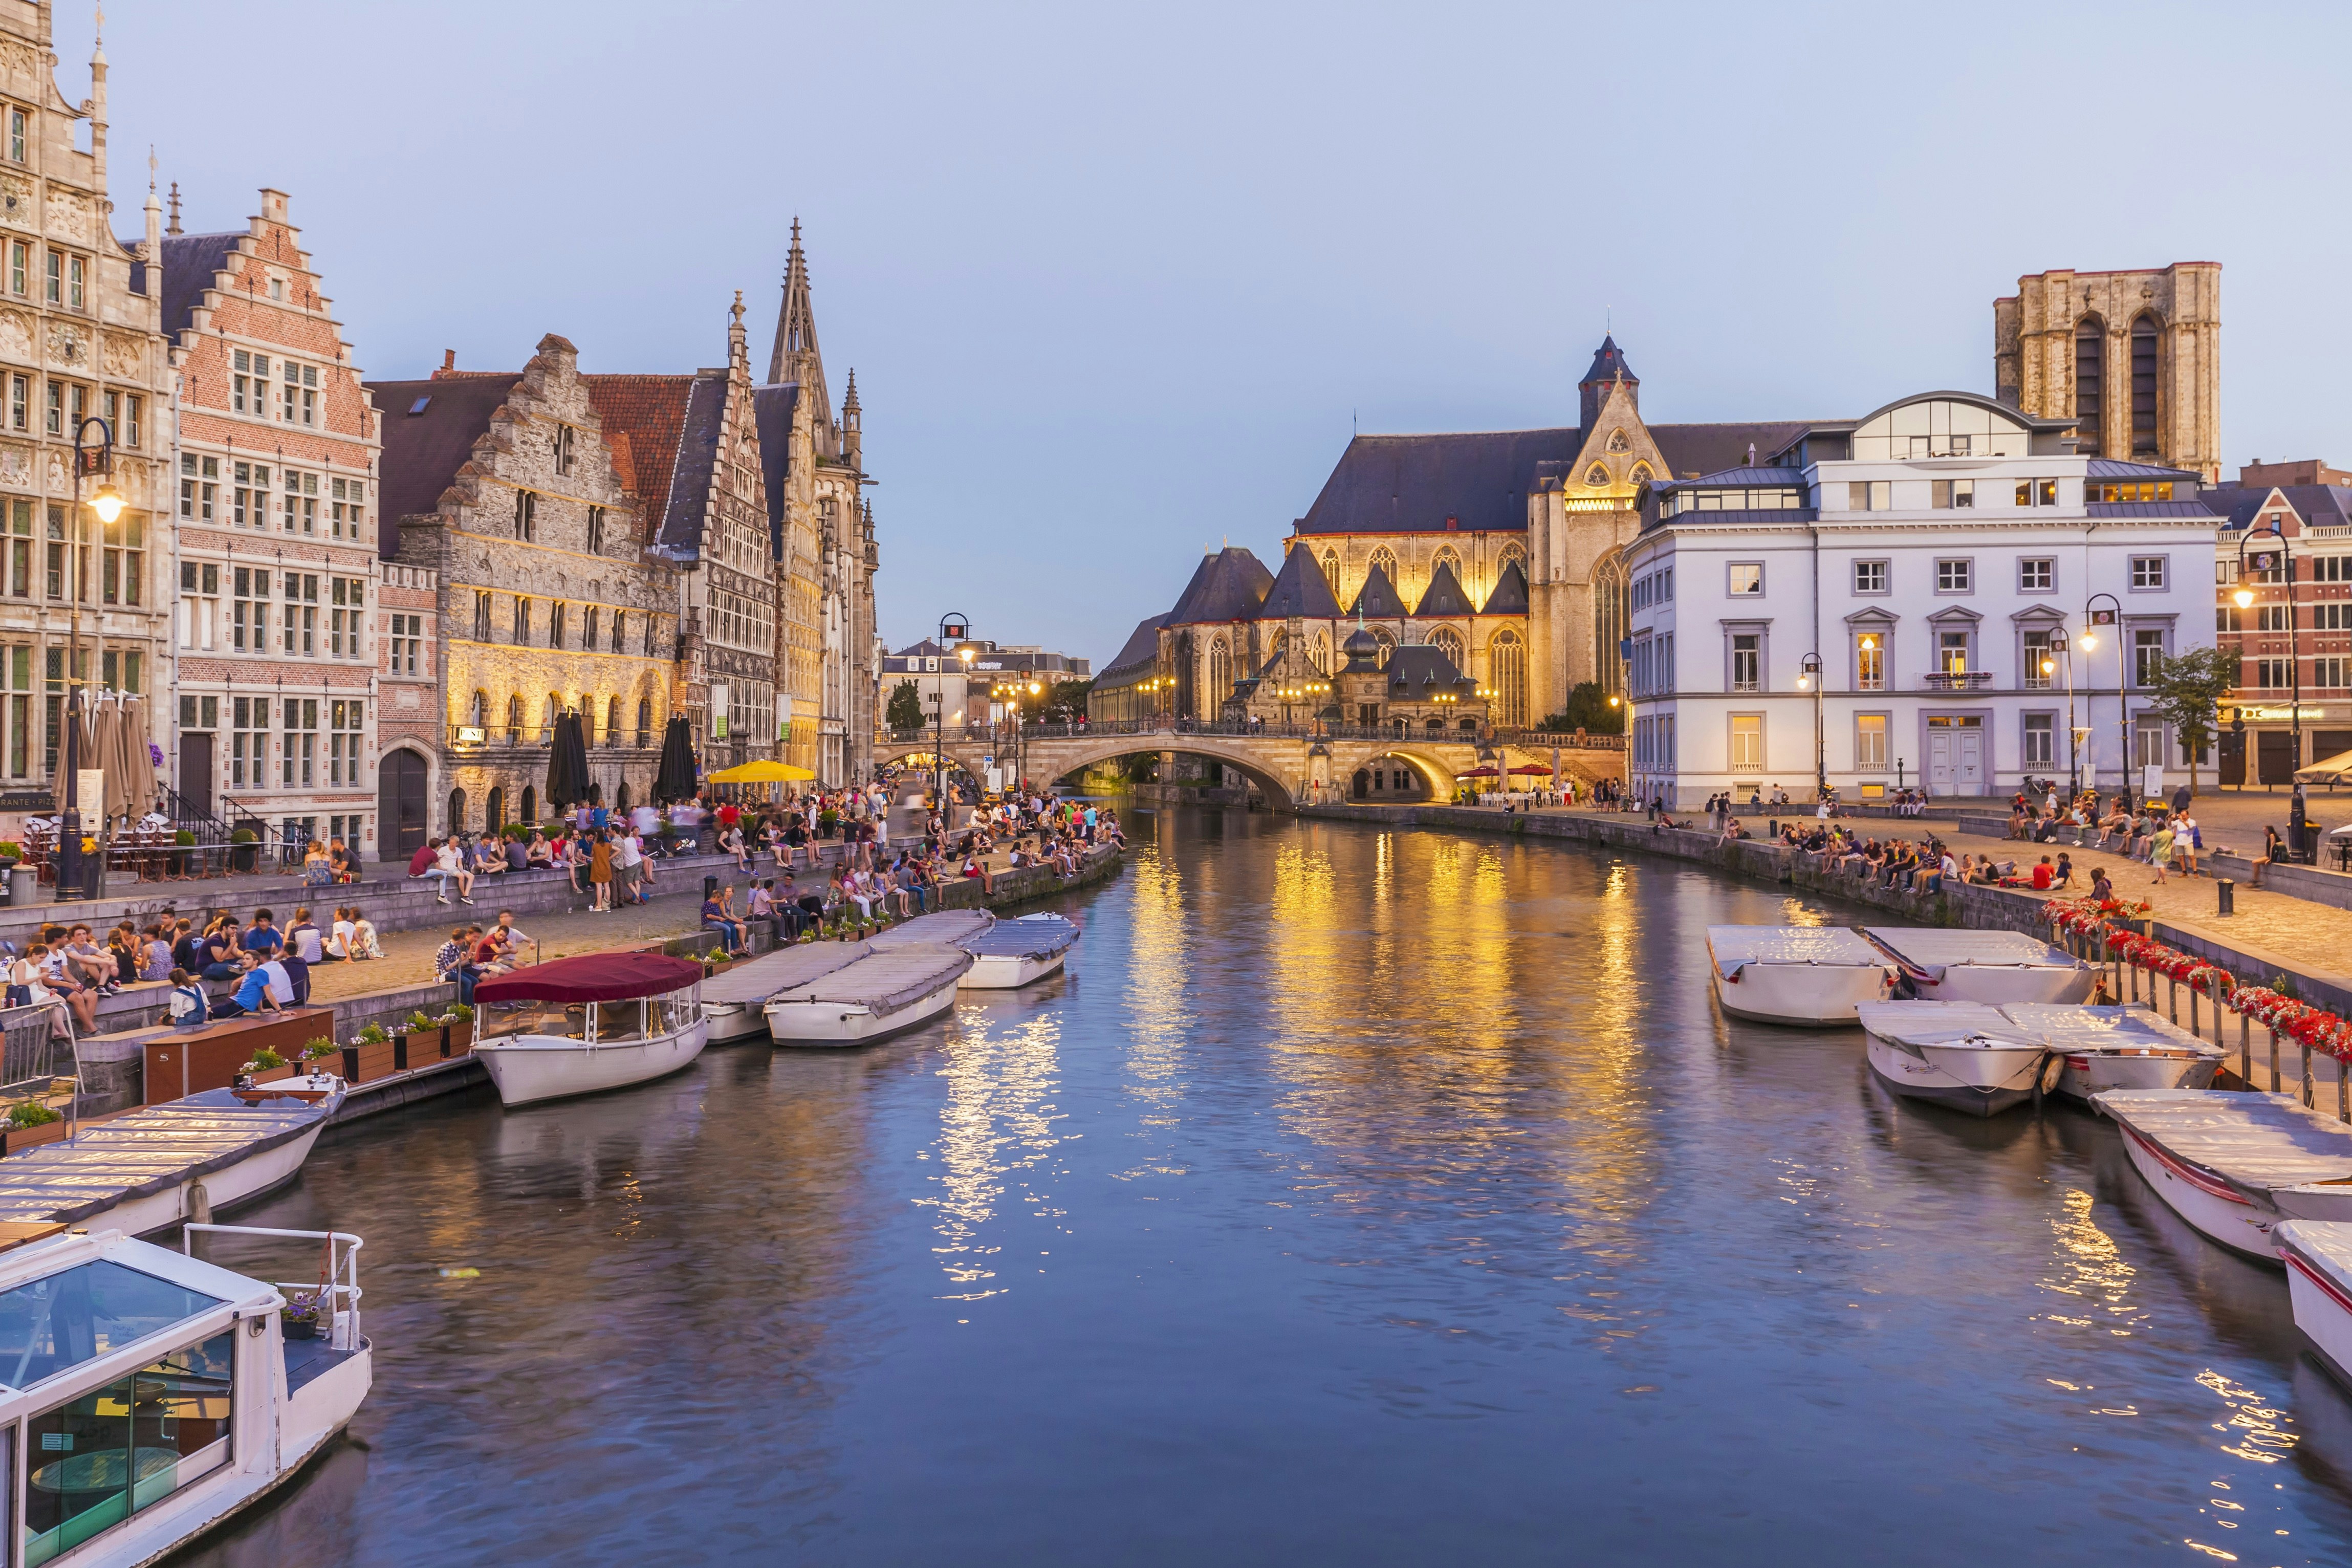 A view of Ghent's old town at dusk, with historic houses and churches spread around the River Leie. Several boats are moored on the river, while groups of people sit on its banks.